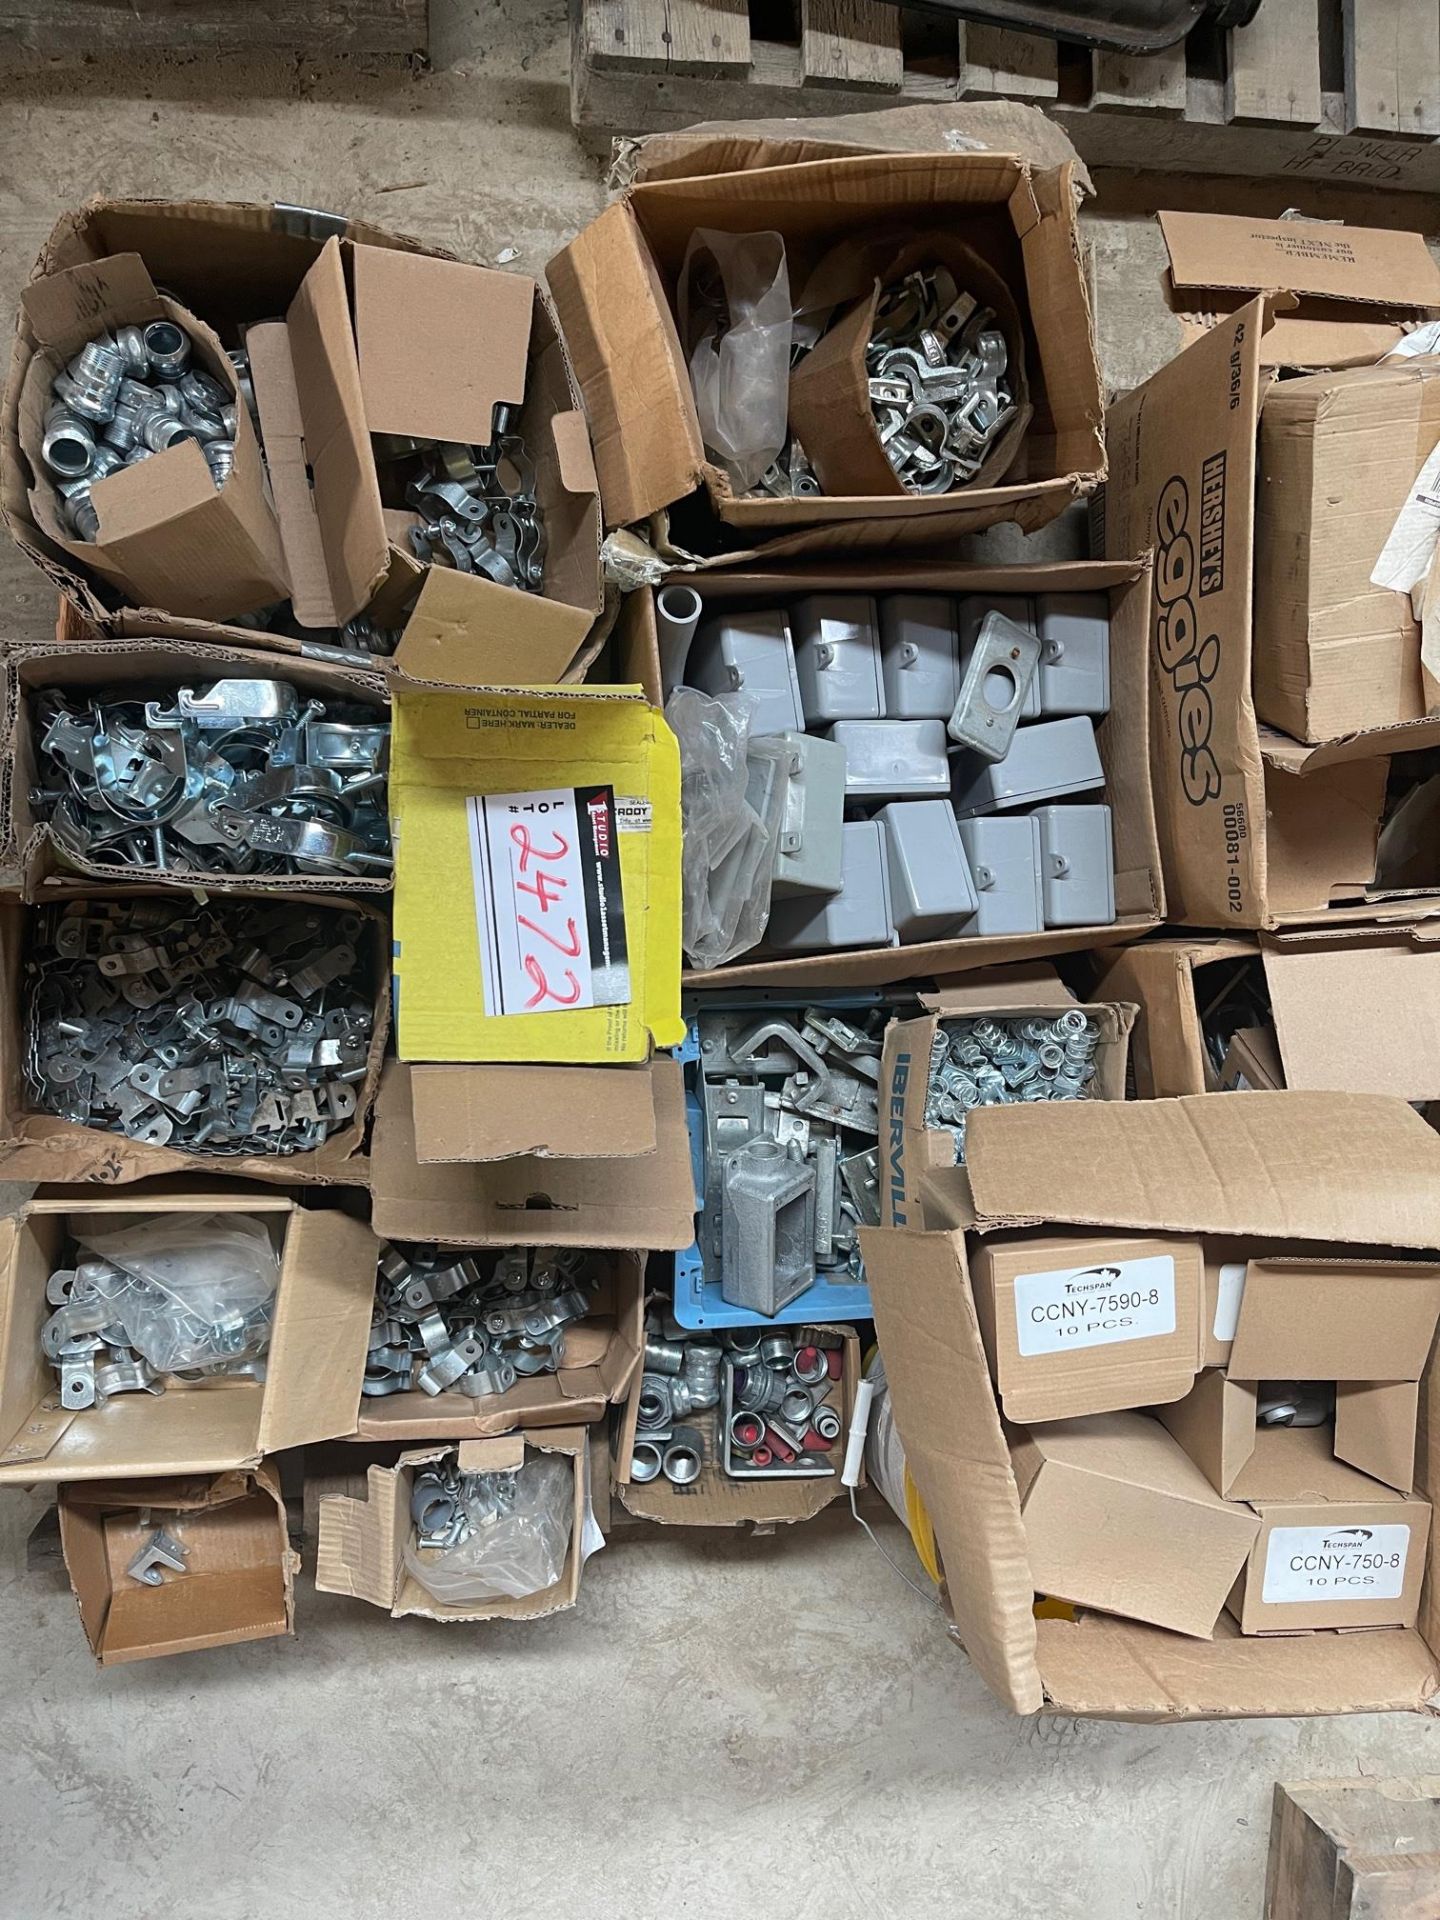 LOT/ ASSORTED FITTINGS, 12X 4 X 4 PVC DEVICE BOXES, BEAM CLAMPS, PIPE STRAPS, CONDUIT JOINERS, CADDY